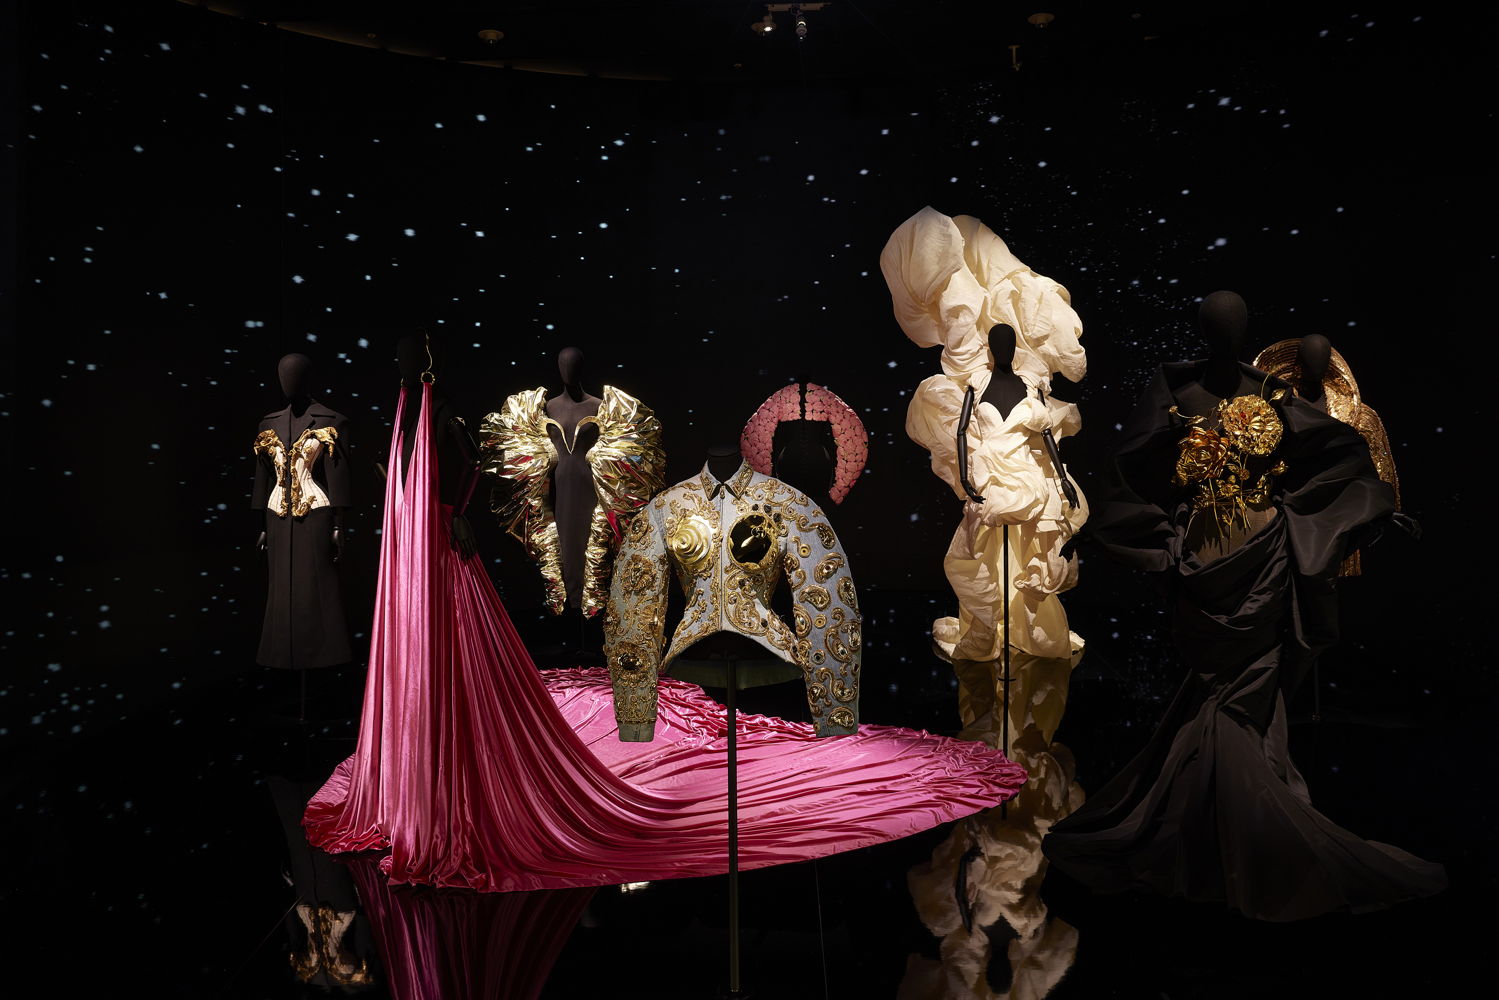 Installation view of designs by Maison Schiaparelli on display in NGV Triennial from 3 December 2023 to 7 April 2024 at NGV International, Melbourne. Photo: Sean Fennessy